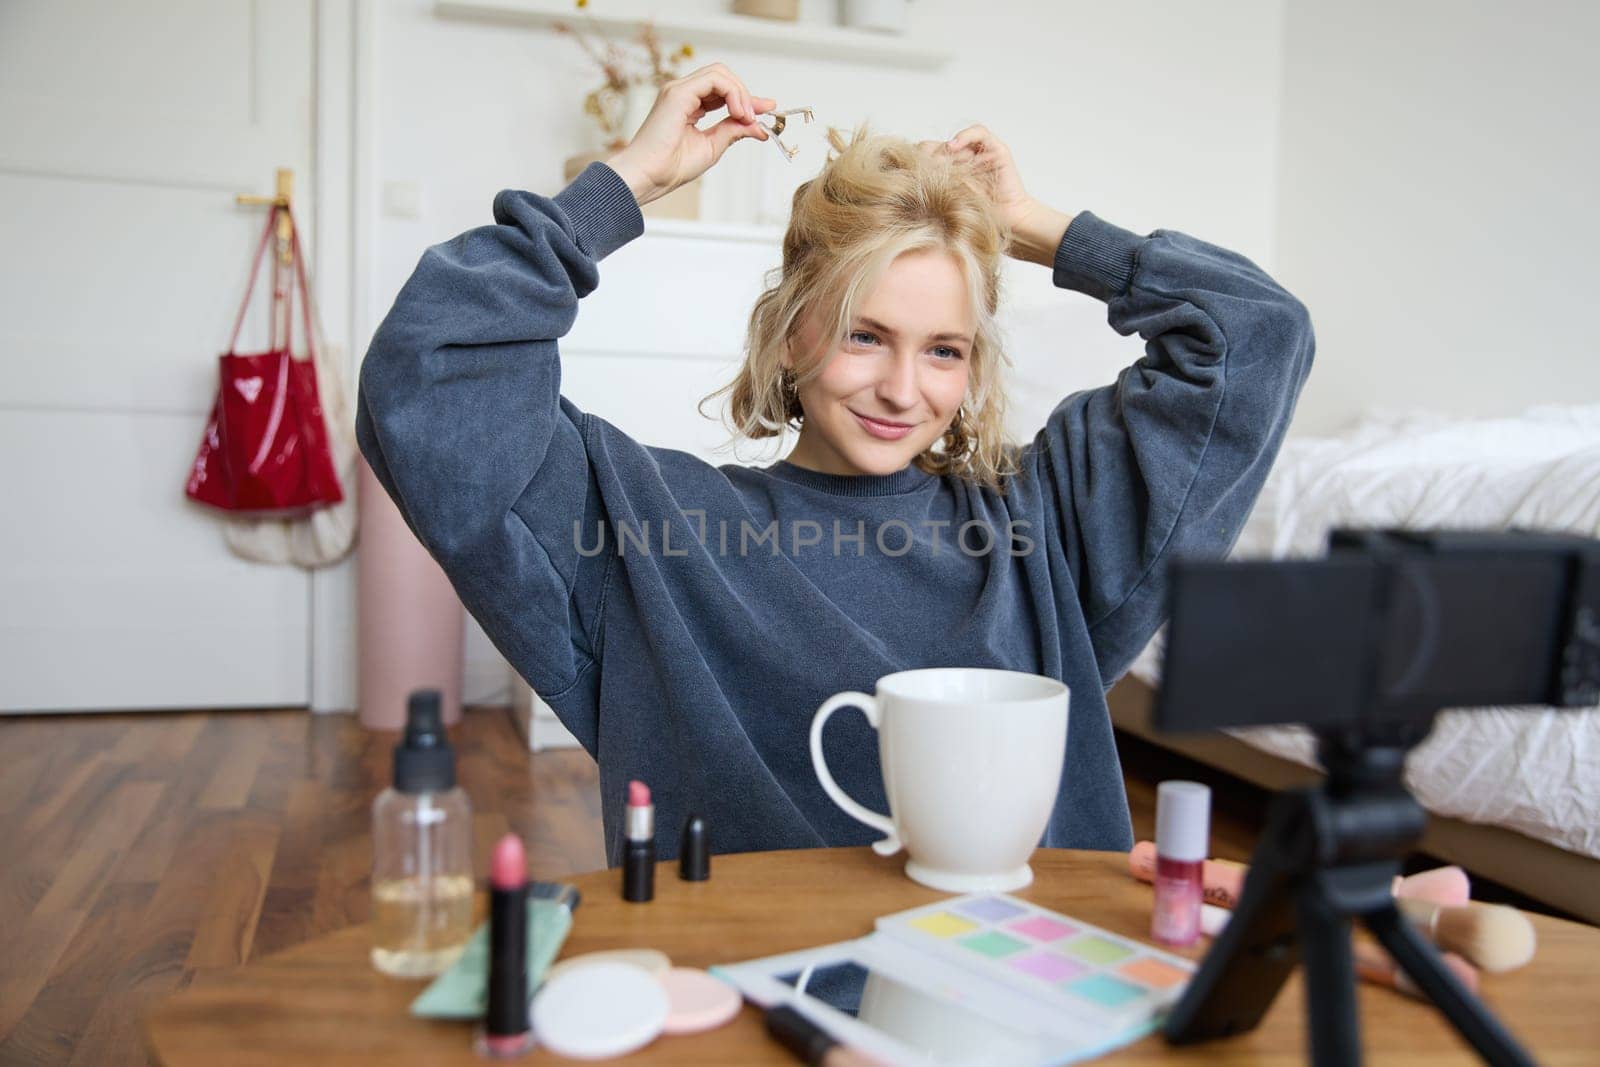 Lifestyle blogger records video of herself while doing hairstyle, showing makeup lifehacks for social media followers, vlogging, using camera for her blog, sitting in a room, drinking tea.